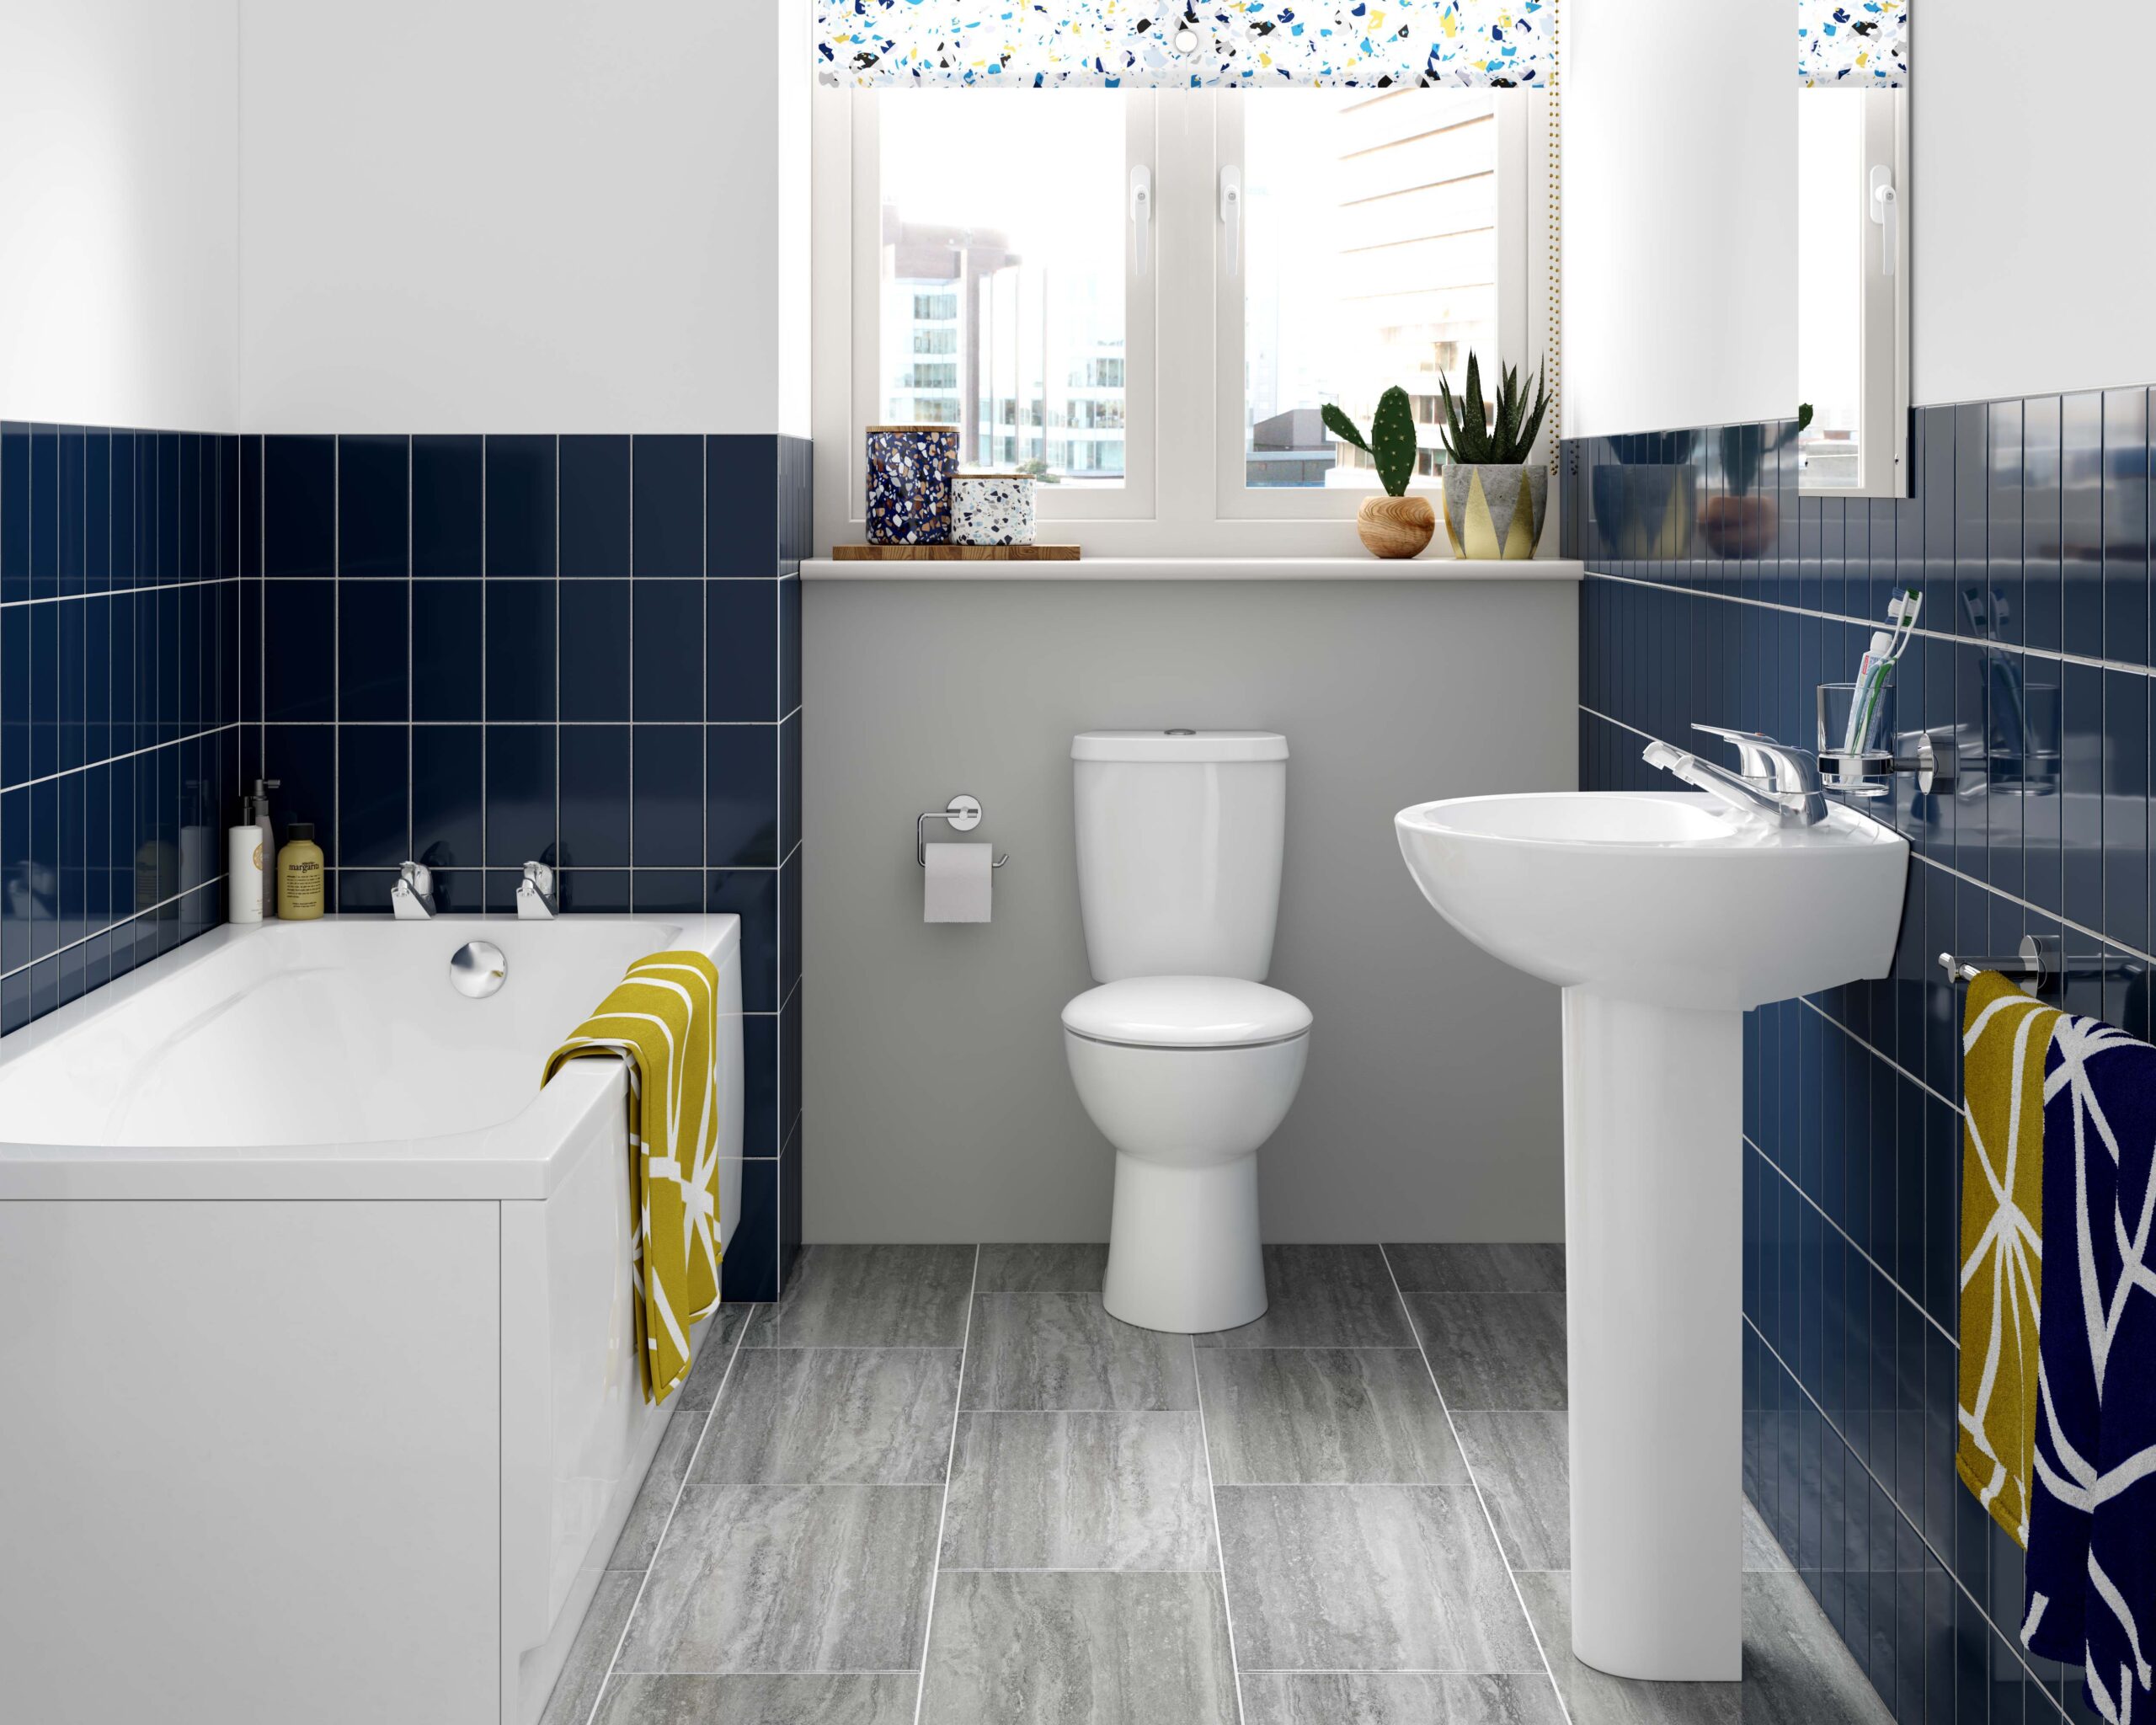 WICKES LAUNCHES BIGGEST BATHROOM COLLECTION YET WITH 800 NEW PRODUCTS @Wickes